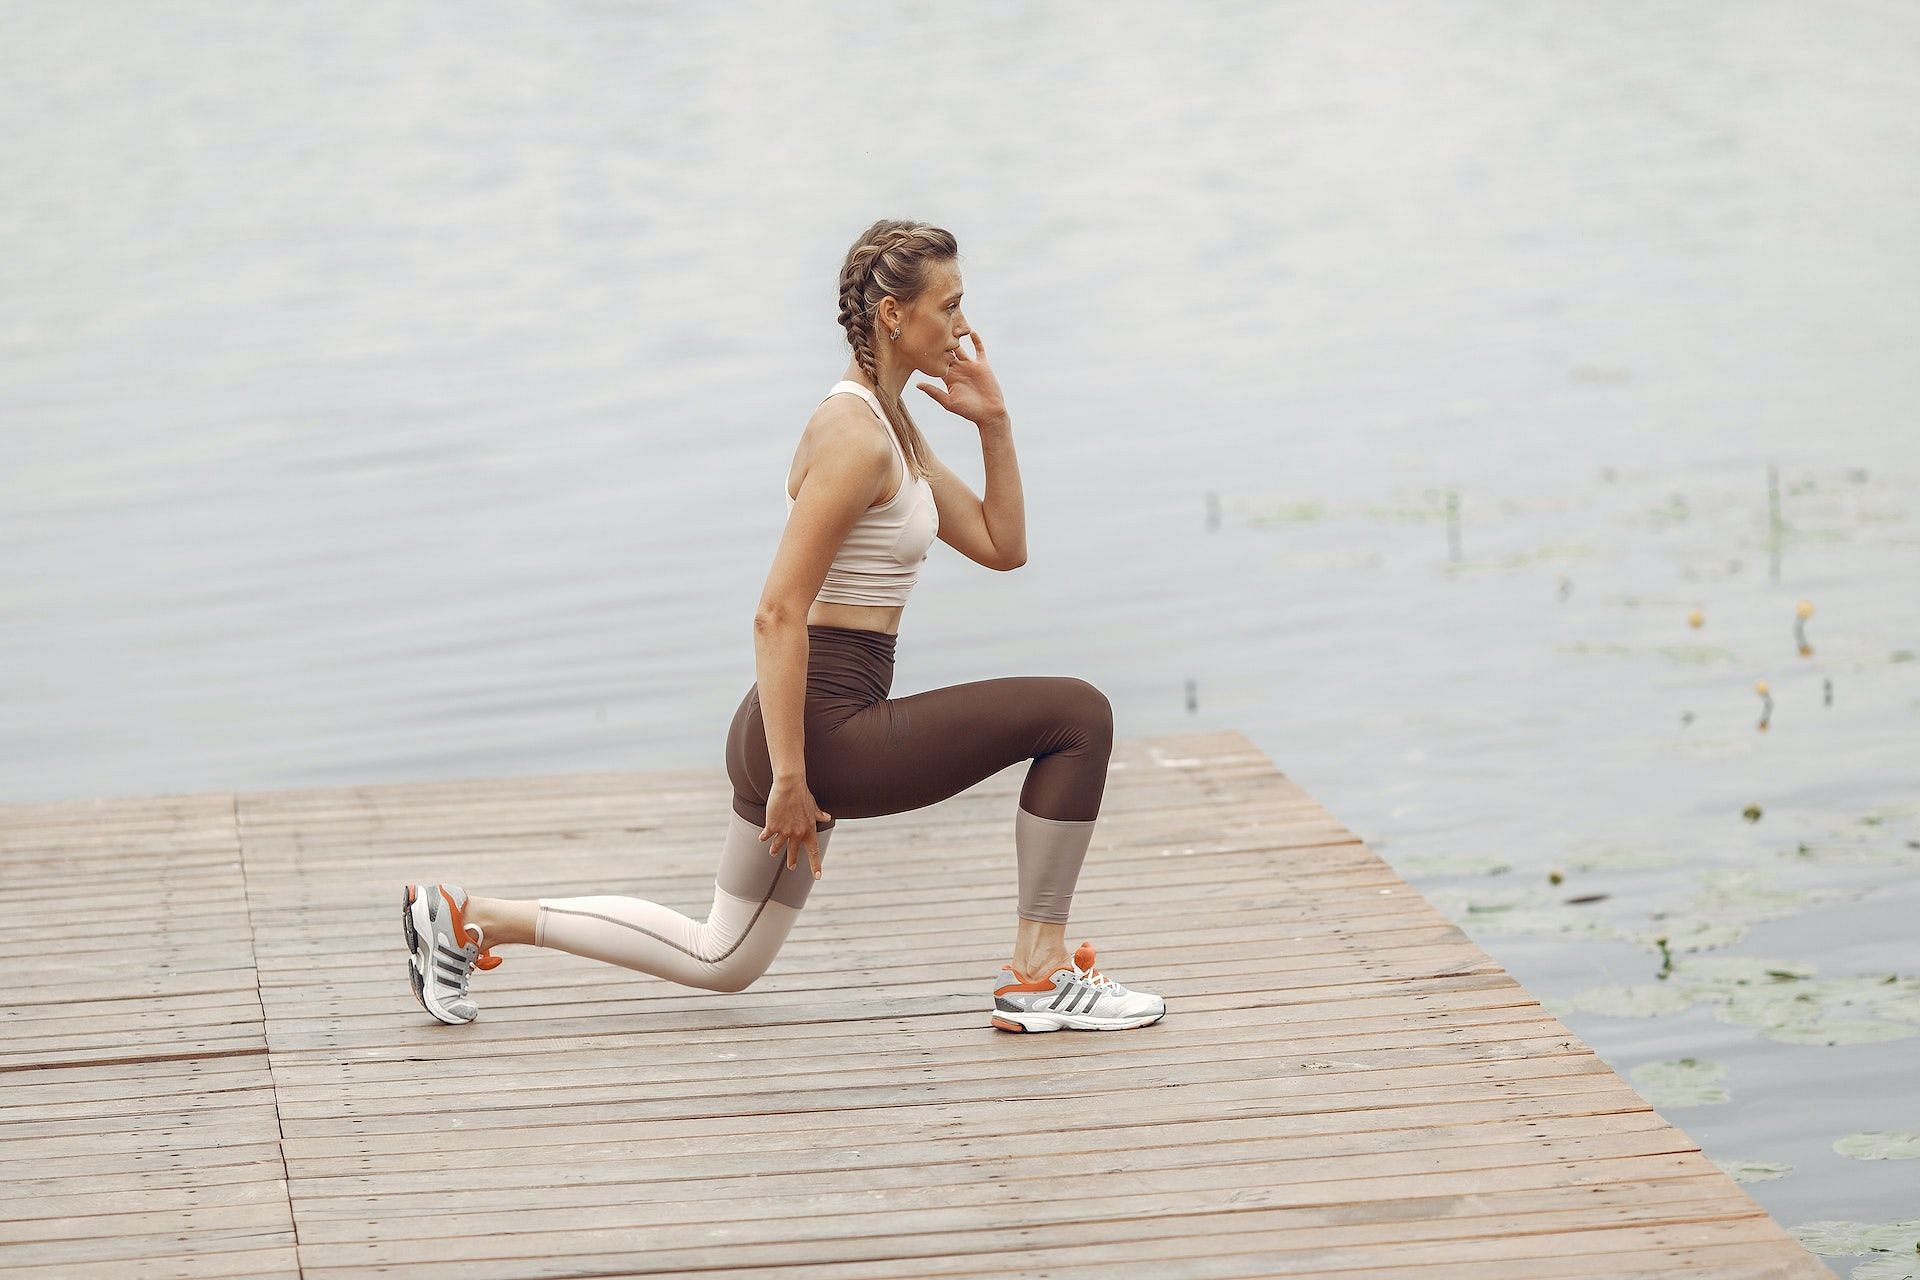 Static lunges target lower body muscles. (Photo via Pexels/Gustavo Fring)